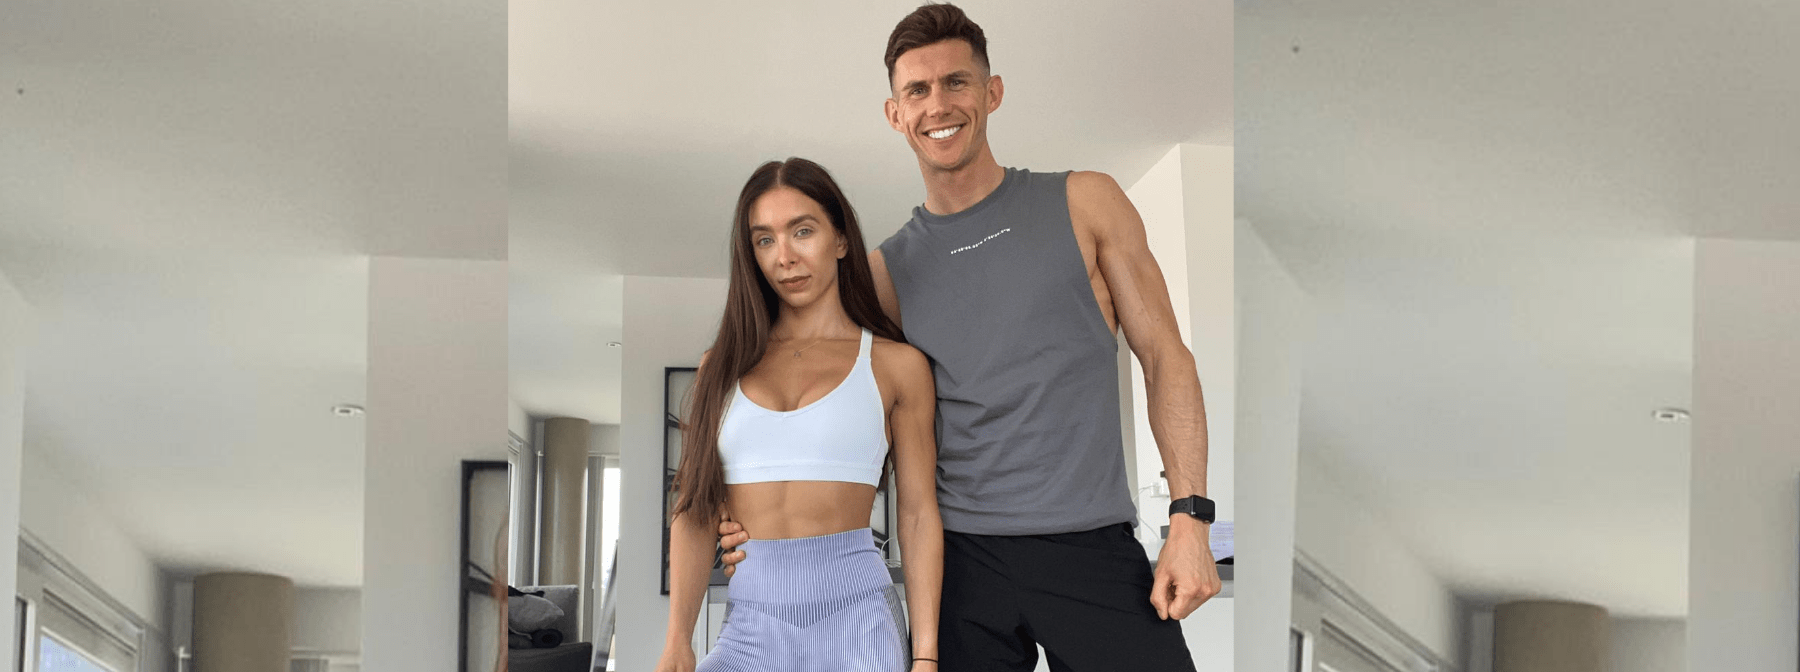 Back To The Gym | First Post-Lockdown Workout With Mark Ross & Jess Layla